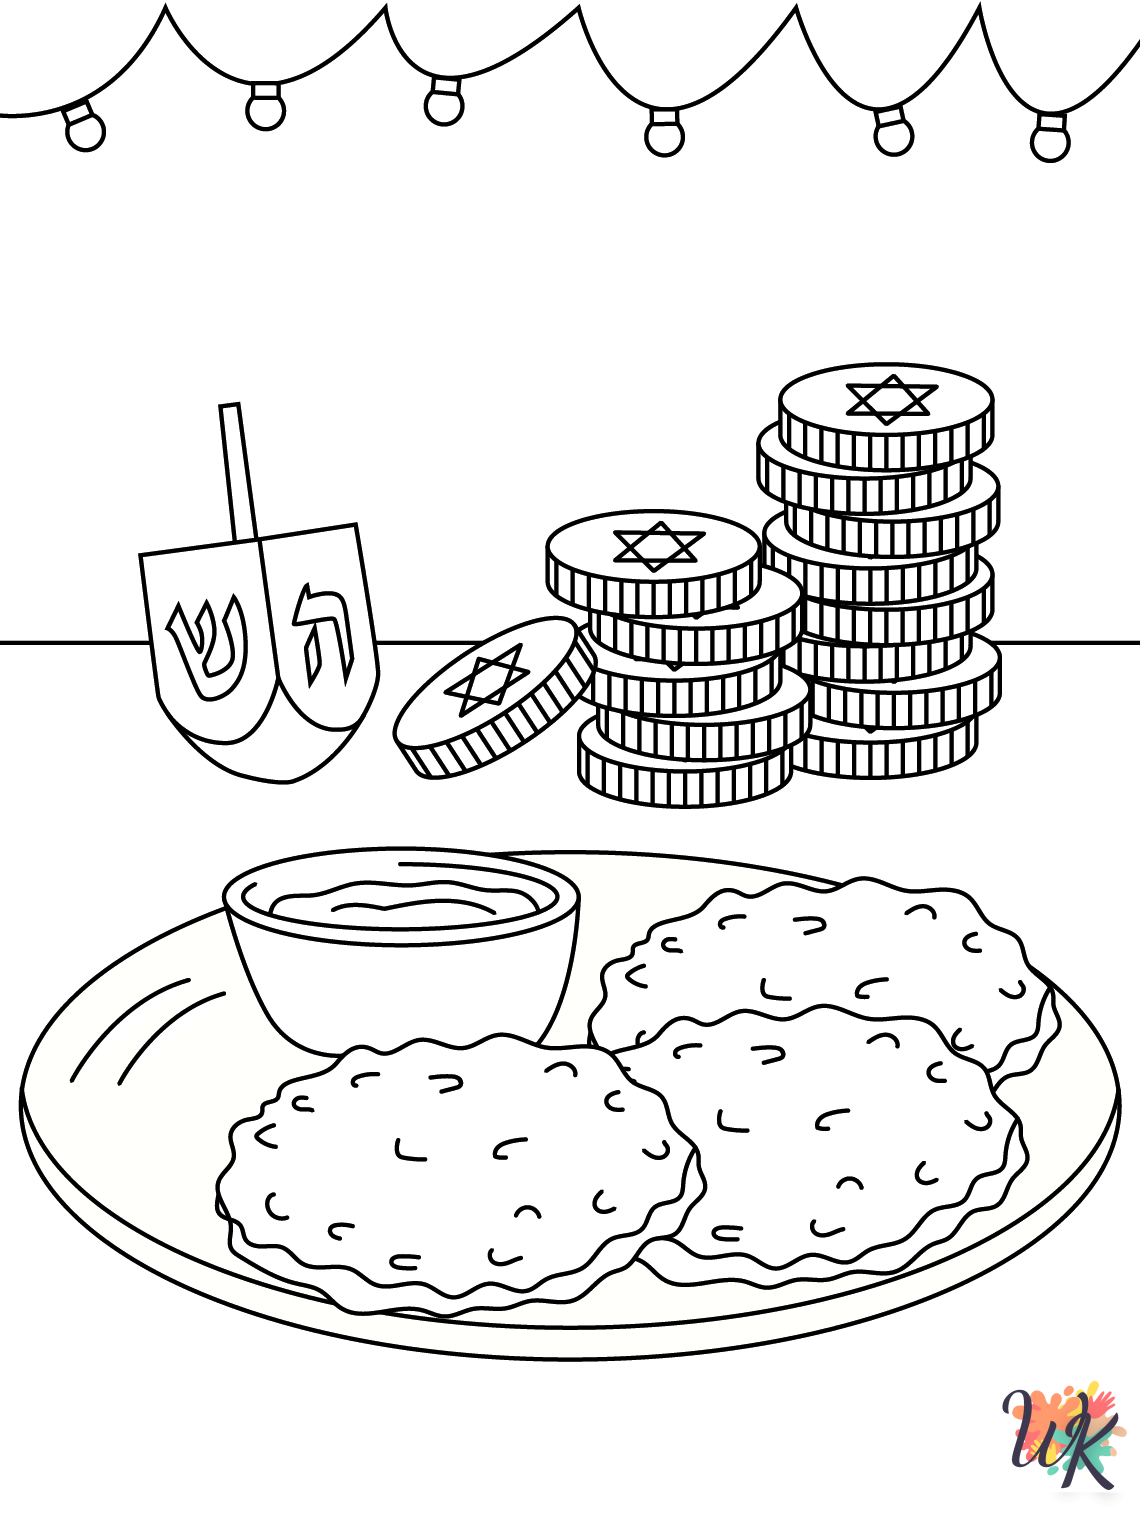 Hanukkah coloring pages for adults 1